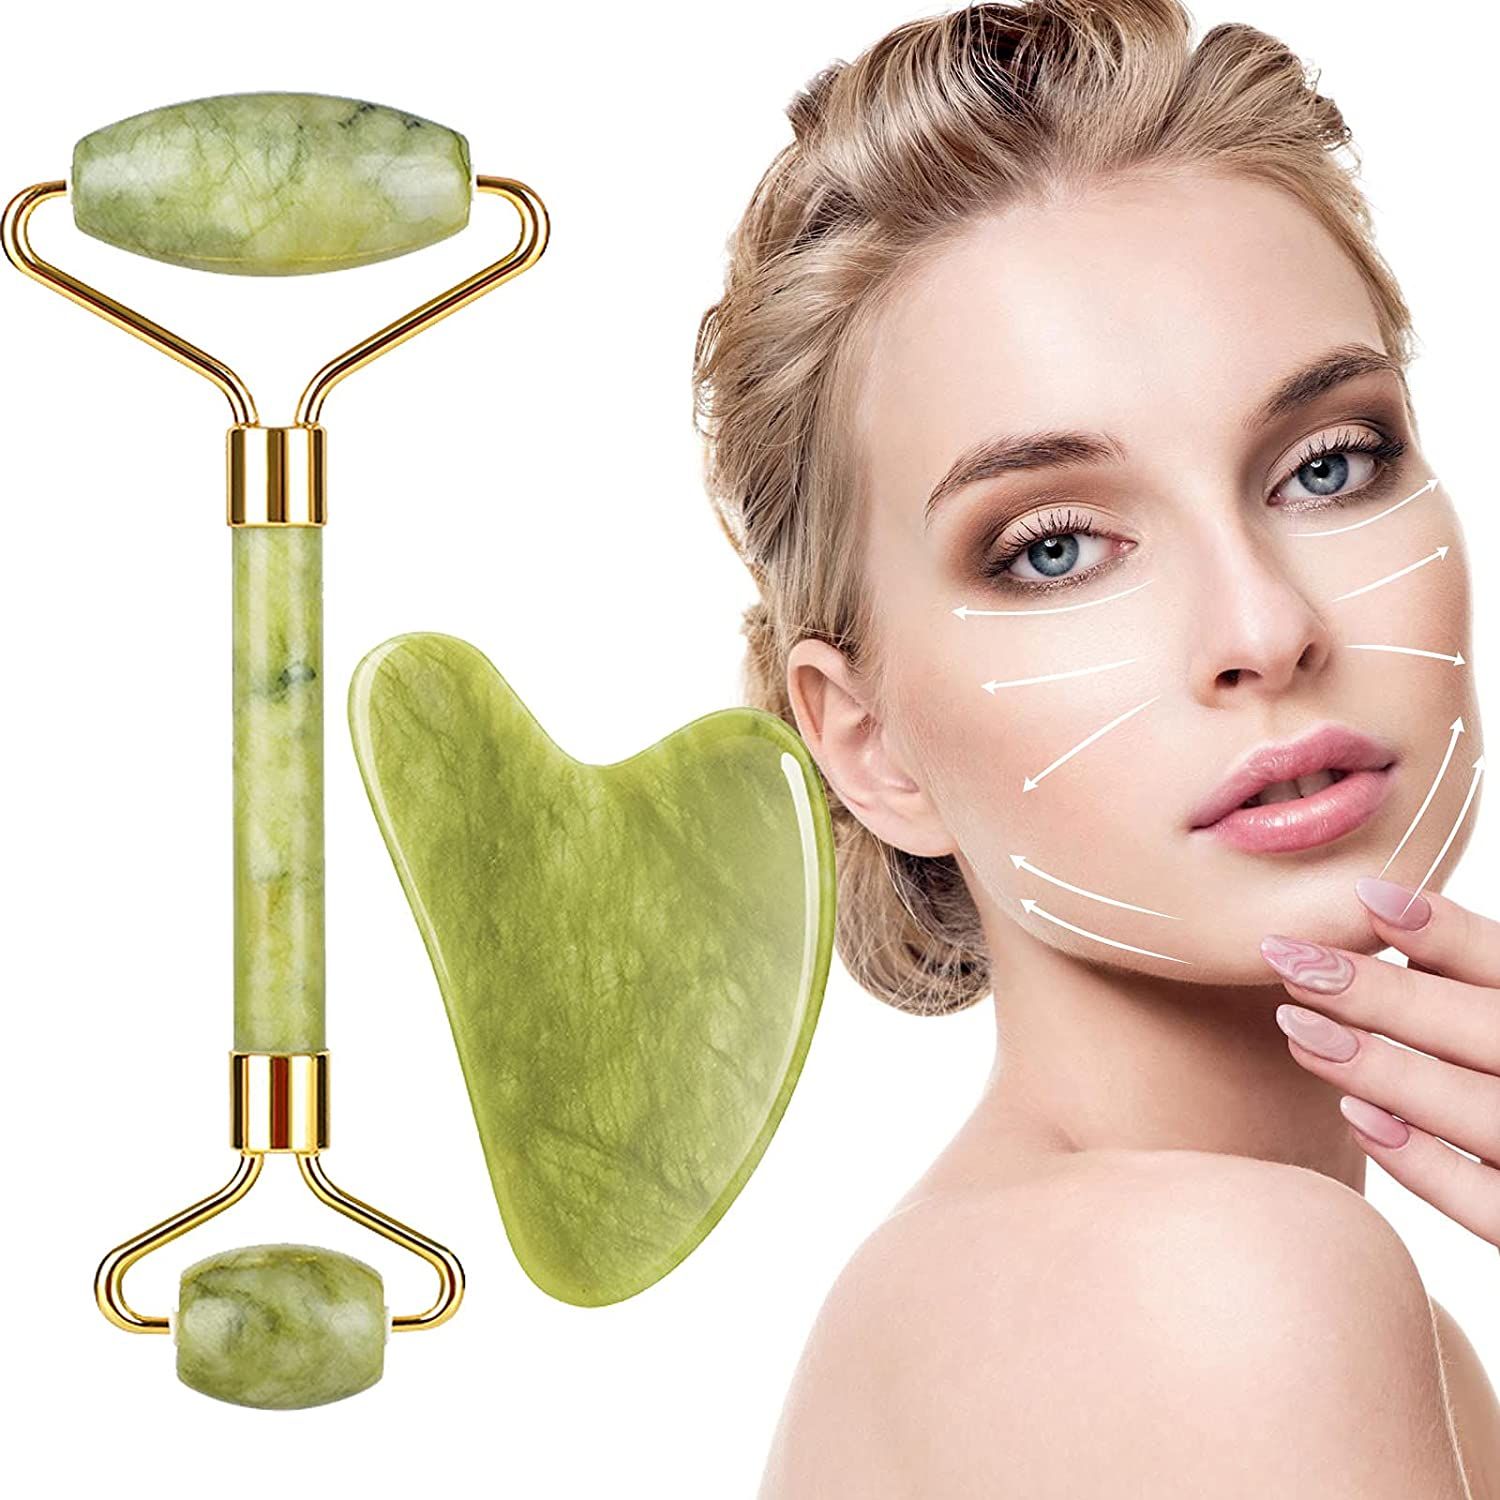 https://media6.ppl-media.com//tr:h-750,w-750,c-at_max,dpr-2/static/img/product/360663/m-n-flfwlass-pack-of-facial-roller-massager-and-under-eye-stone-gua-sha-1_1_display_1690971632_646e43b7.jpg